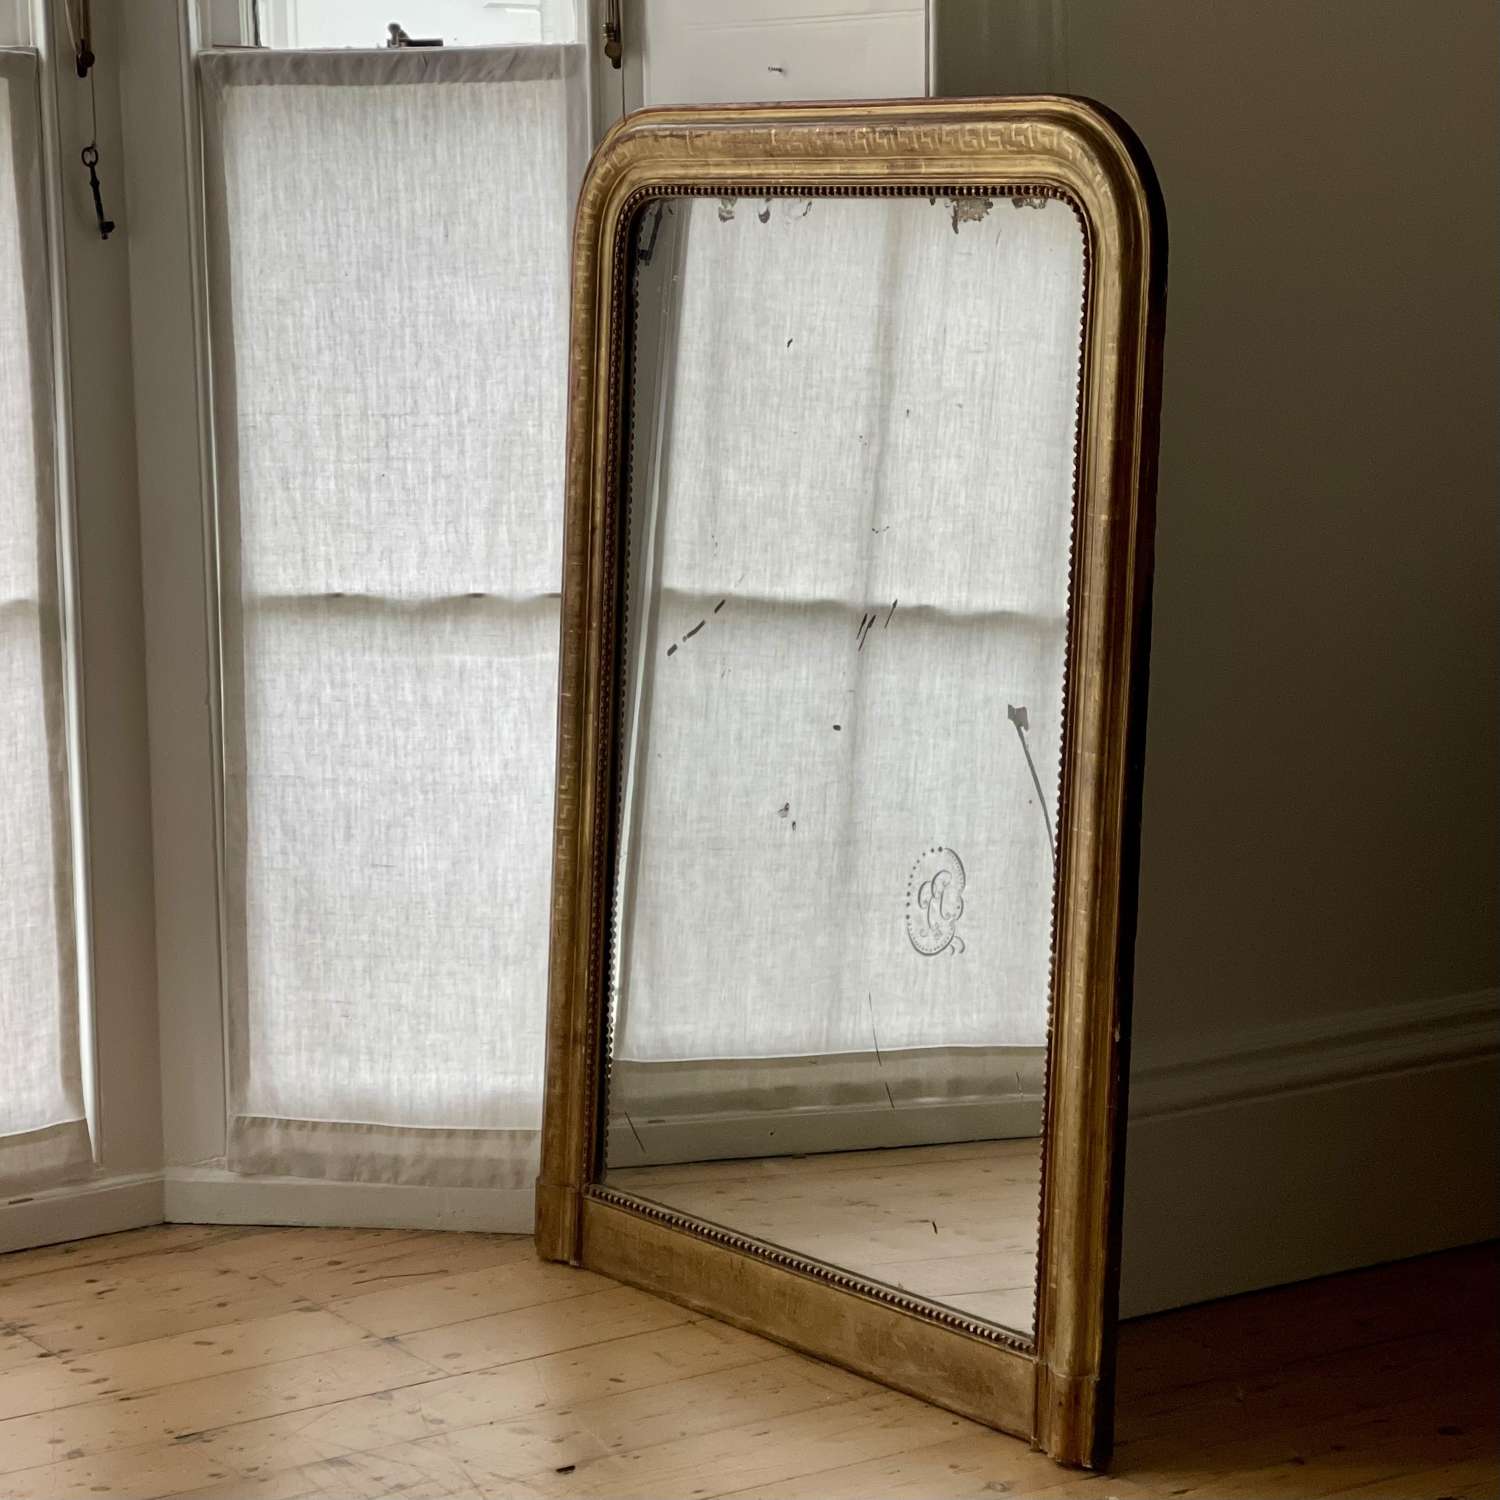 Large antique French gilt mirror - c1830